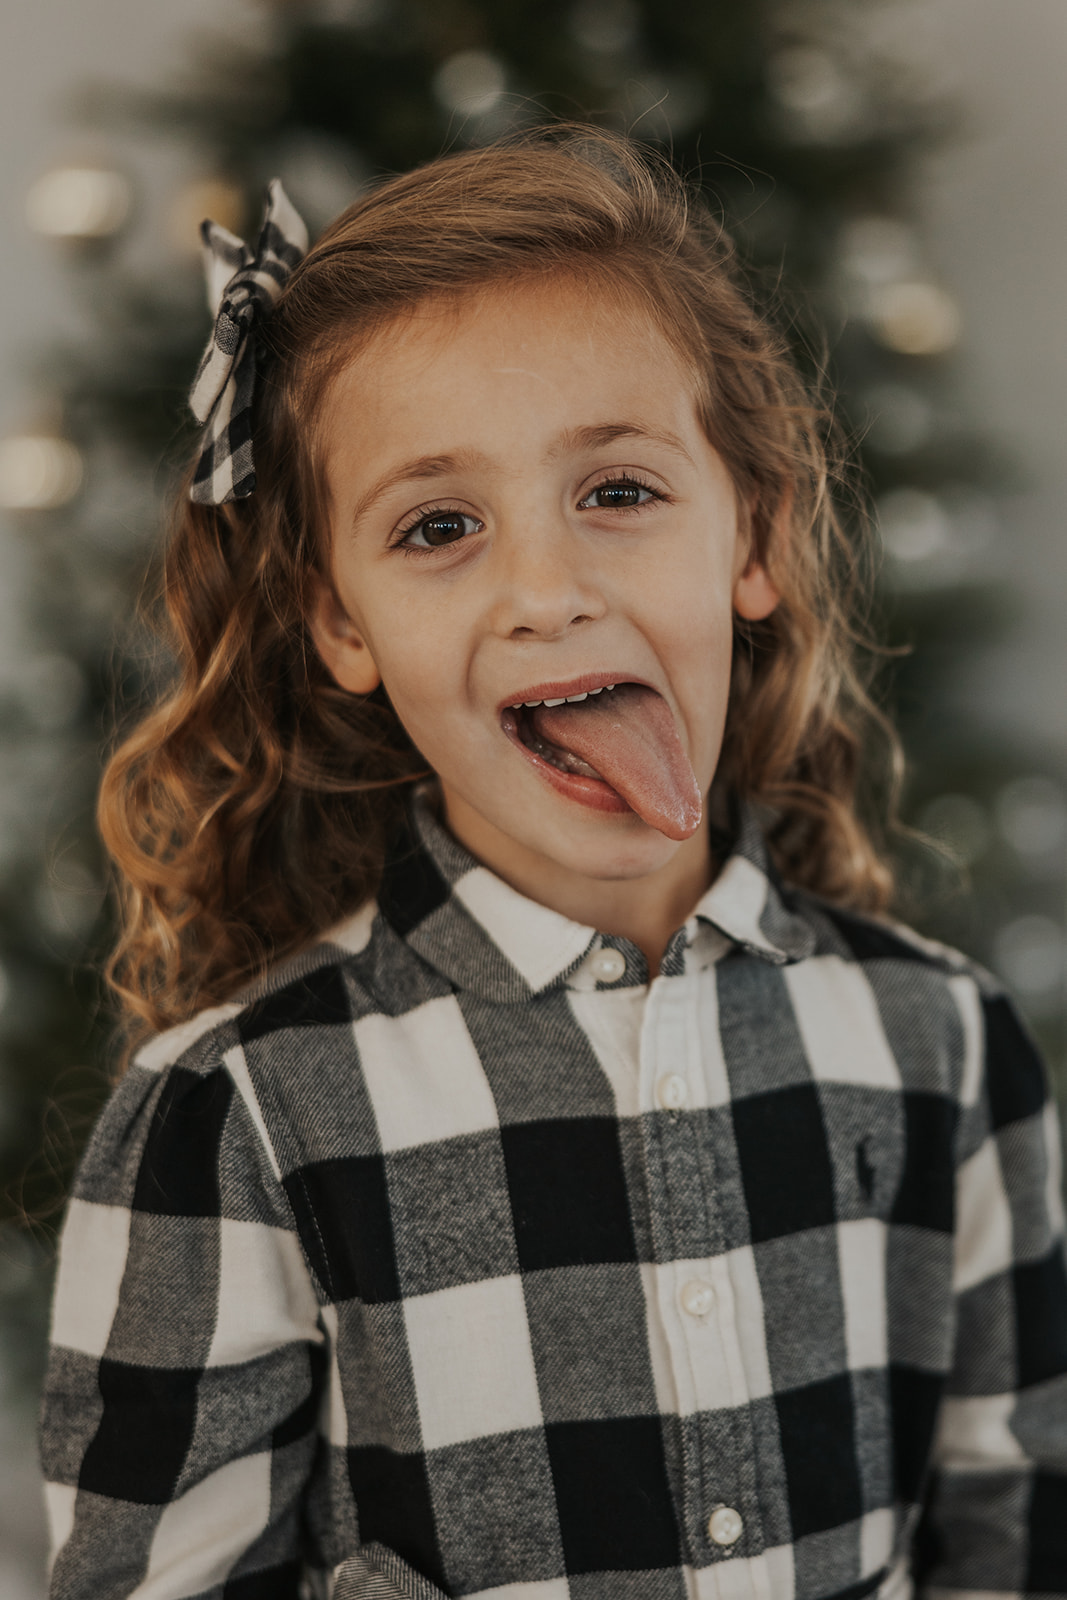 Young girl makes a silly face during a Christmas photoshoot